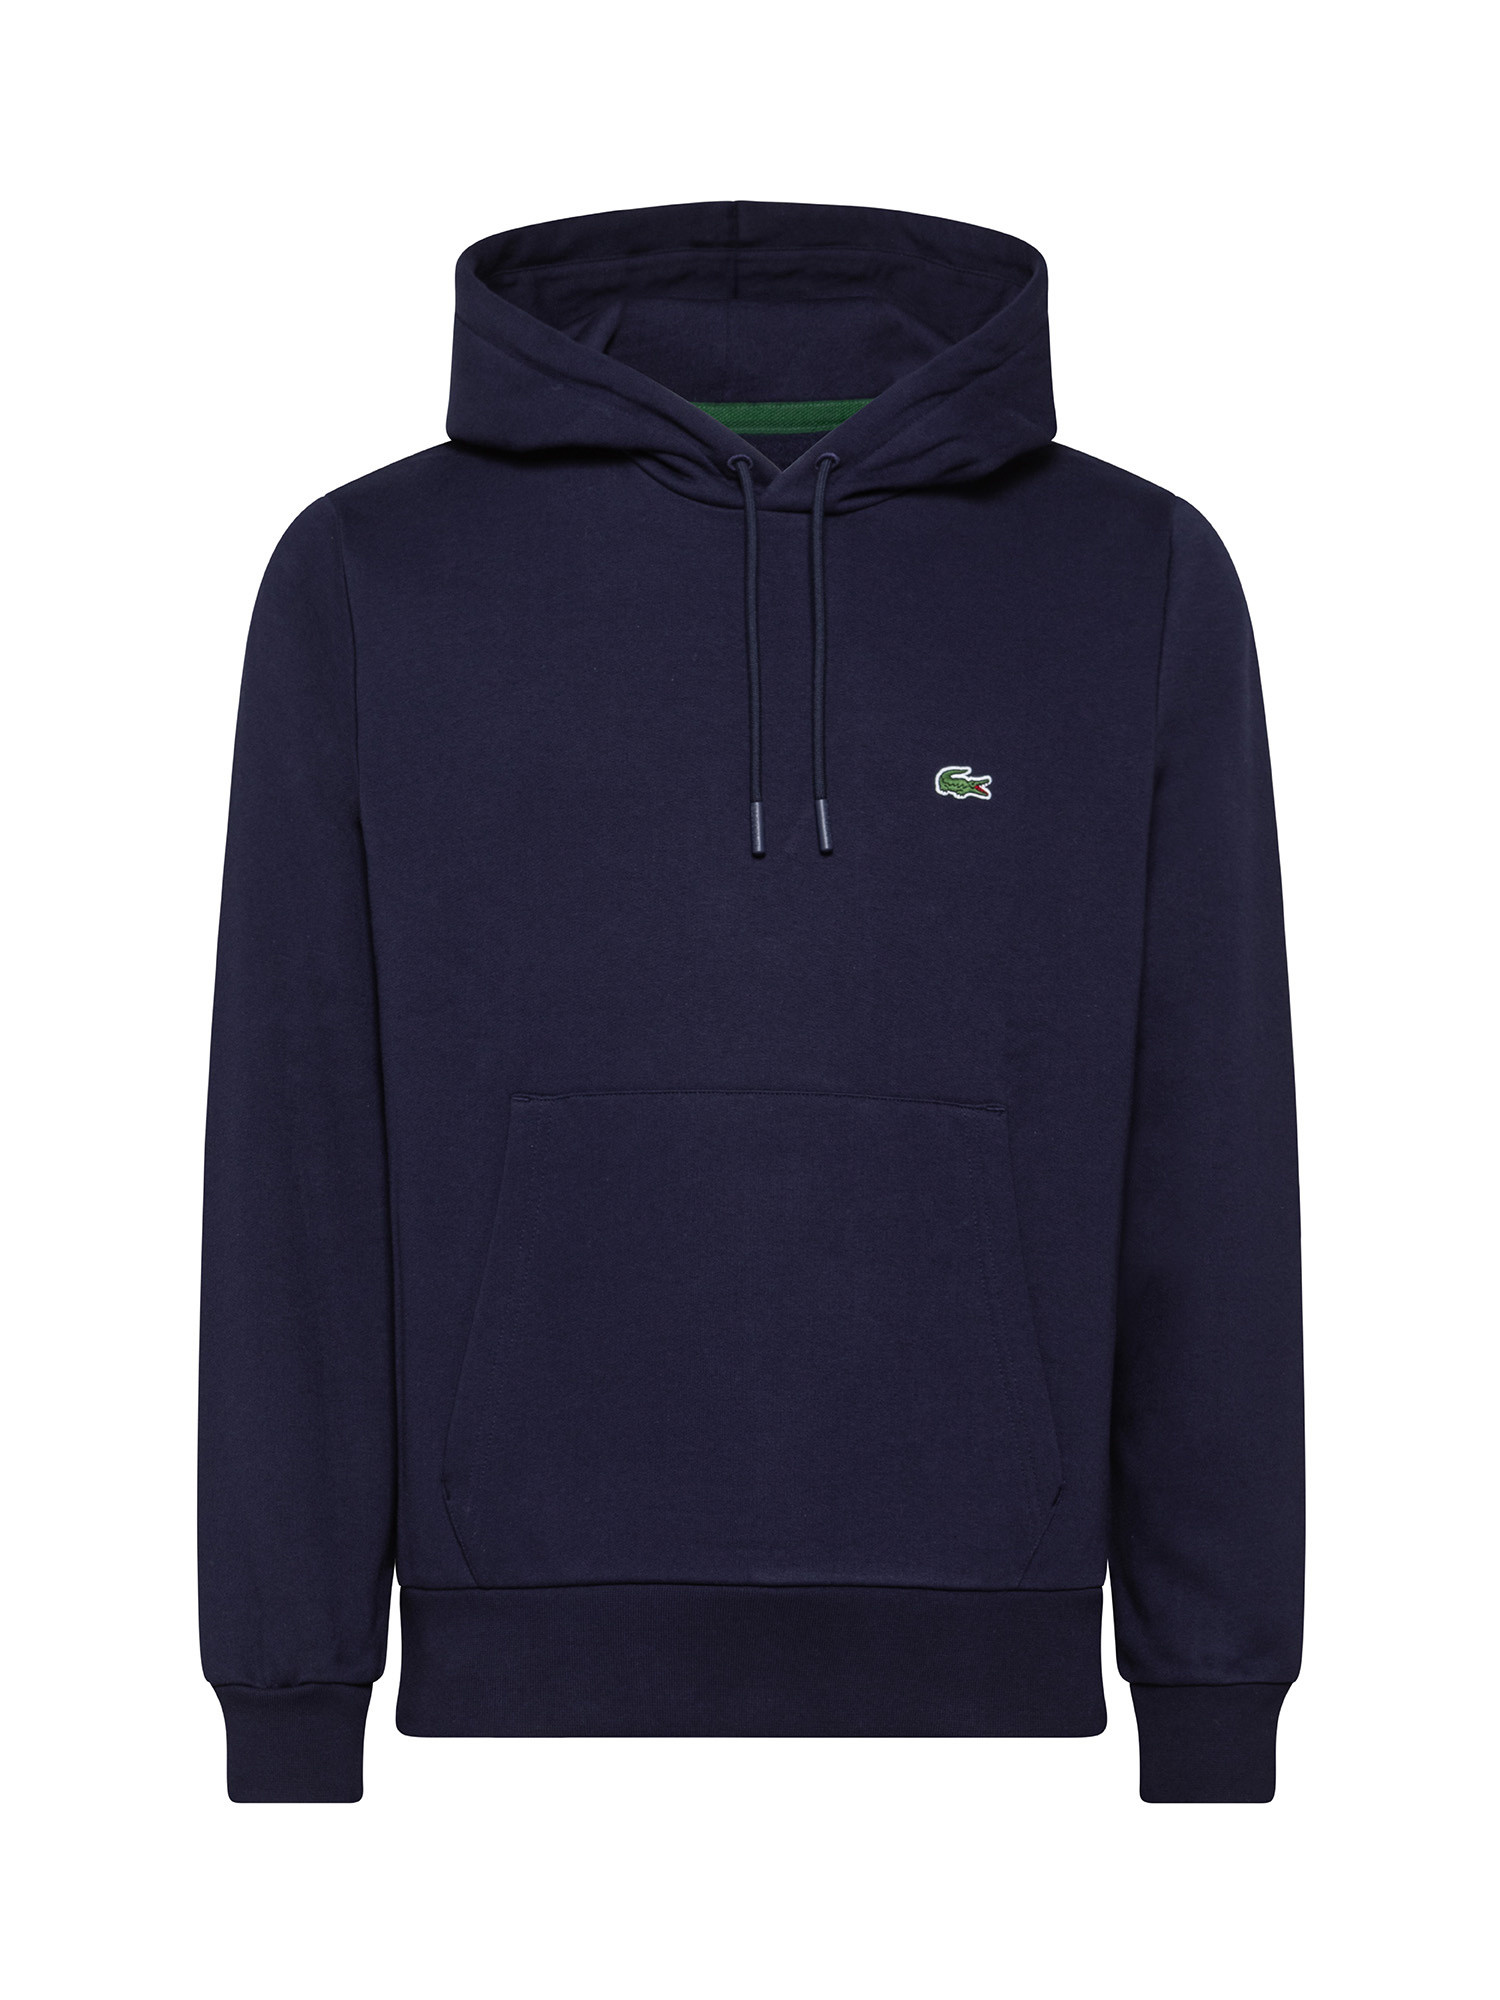 Lacoste - Organic cotton hoodie, Blue, large image number 0